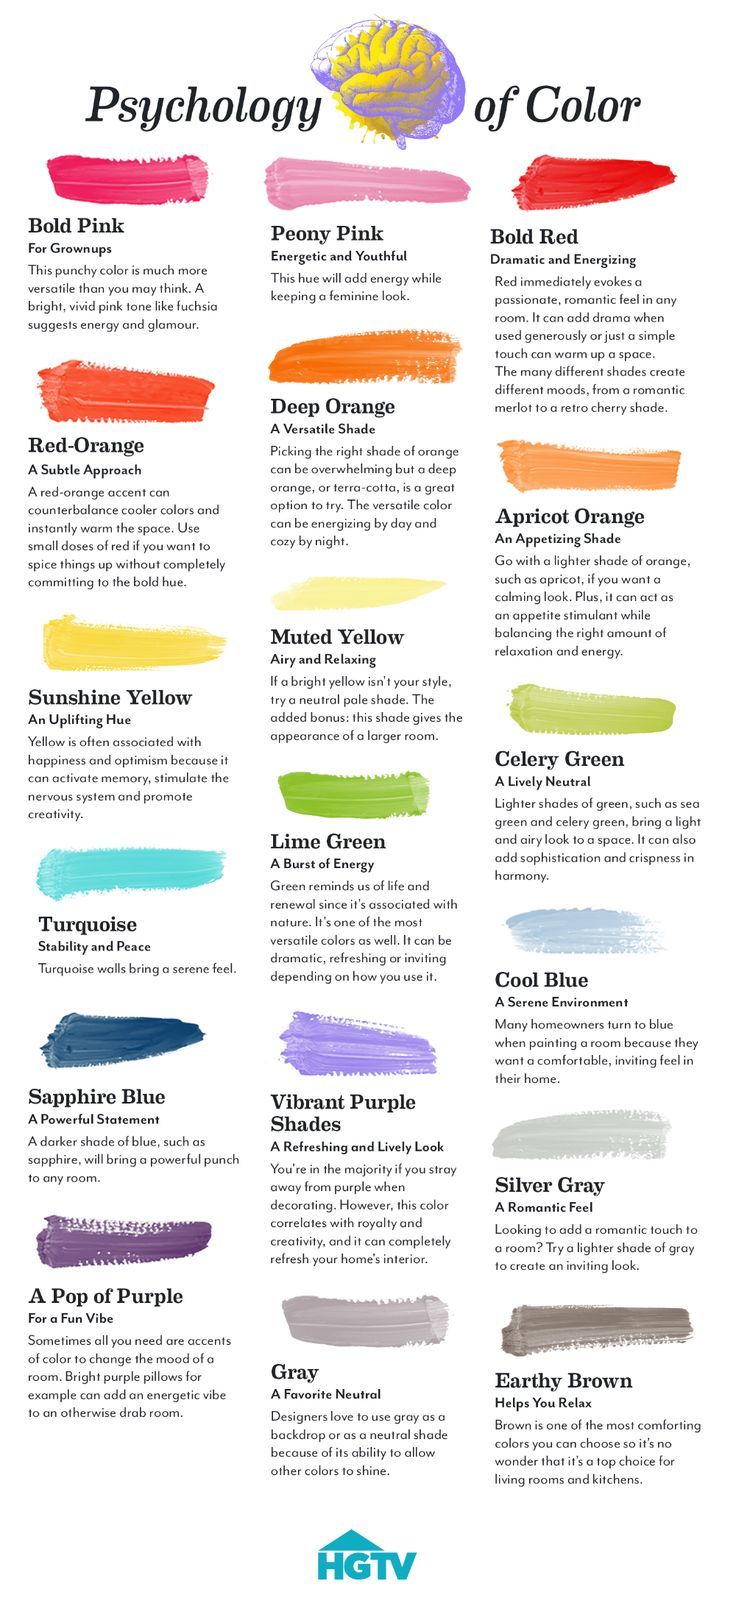 the different colors of paint are shown in this poster, which shows how to use each color